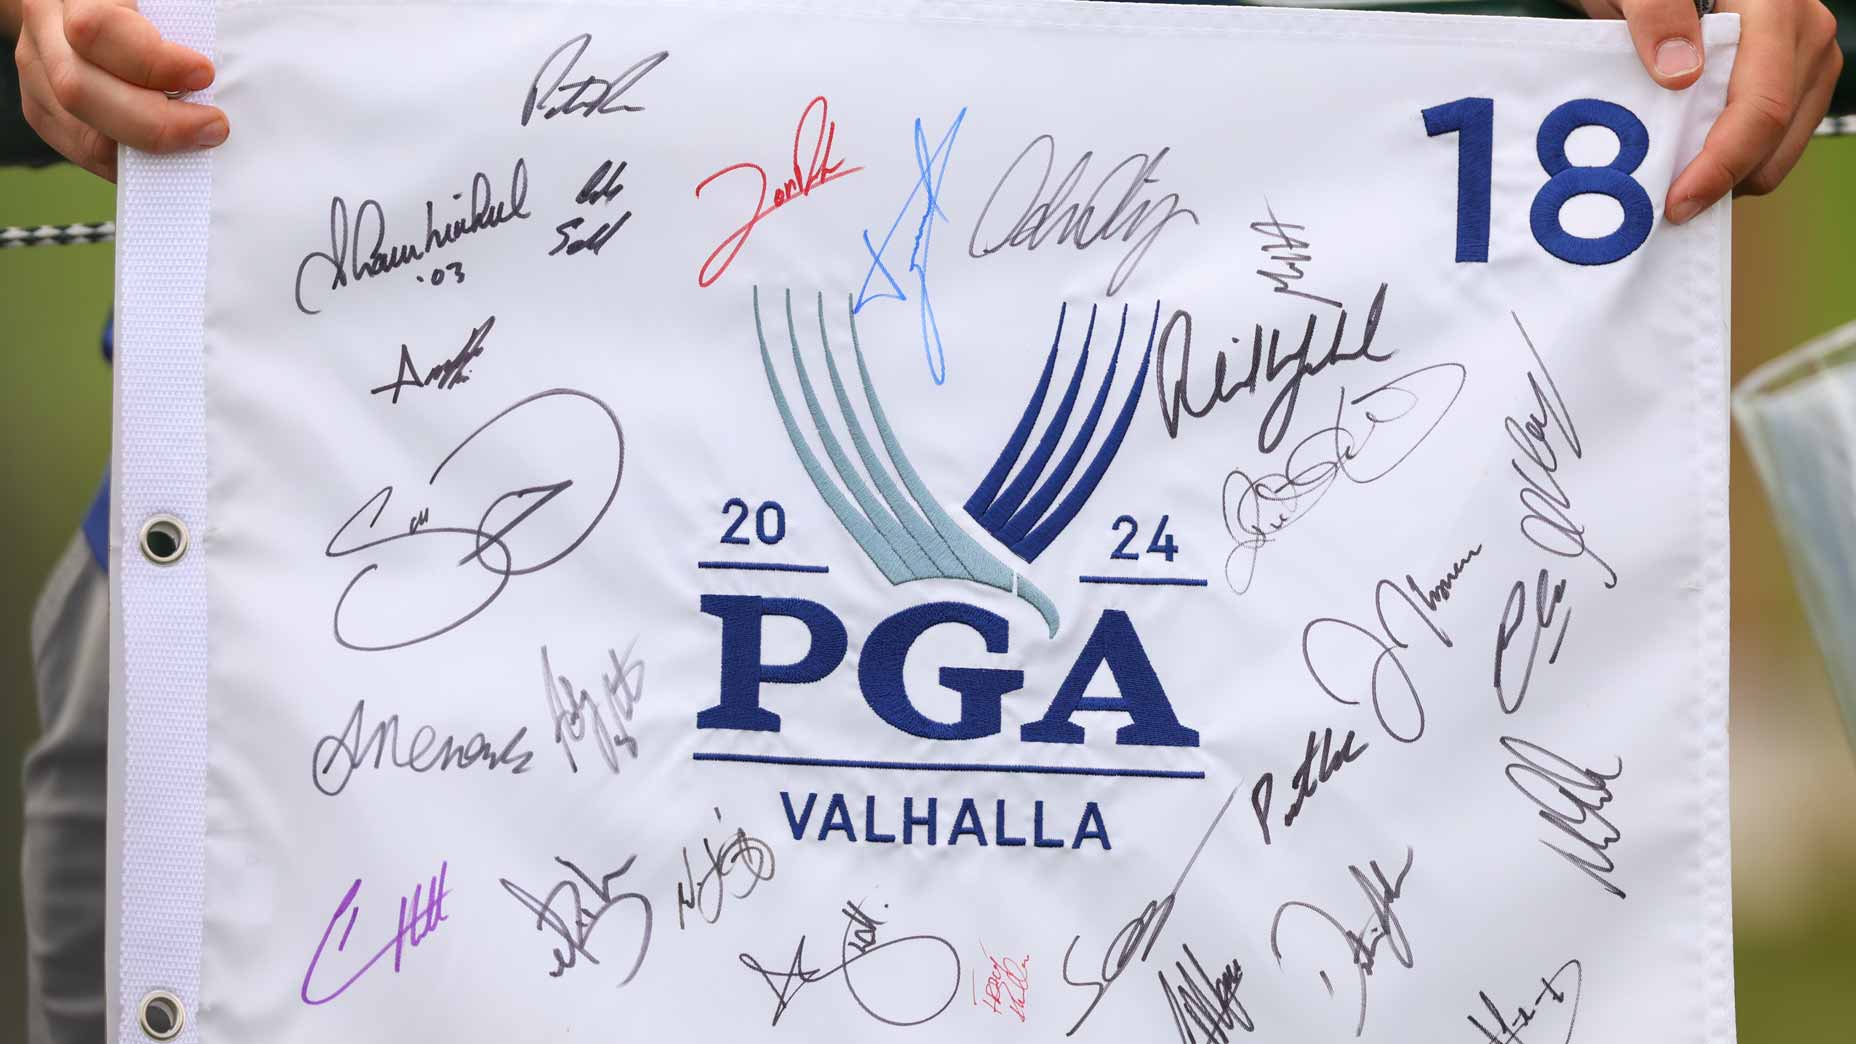 Fans hold signed 2024 PGA Championship flags at Valhalla